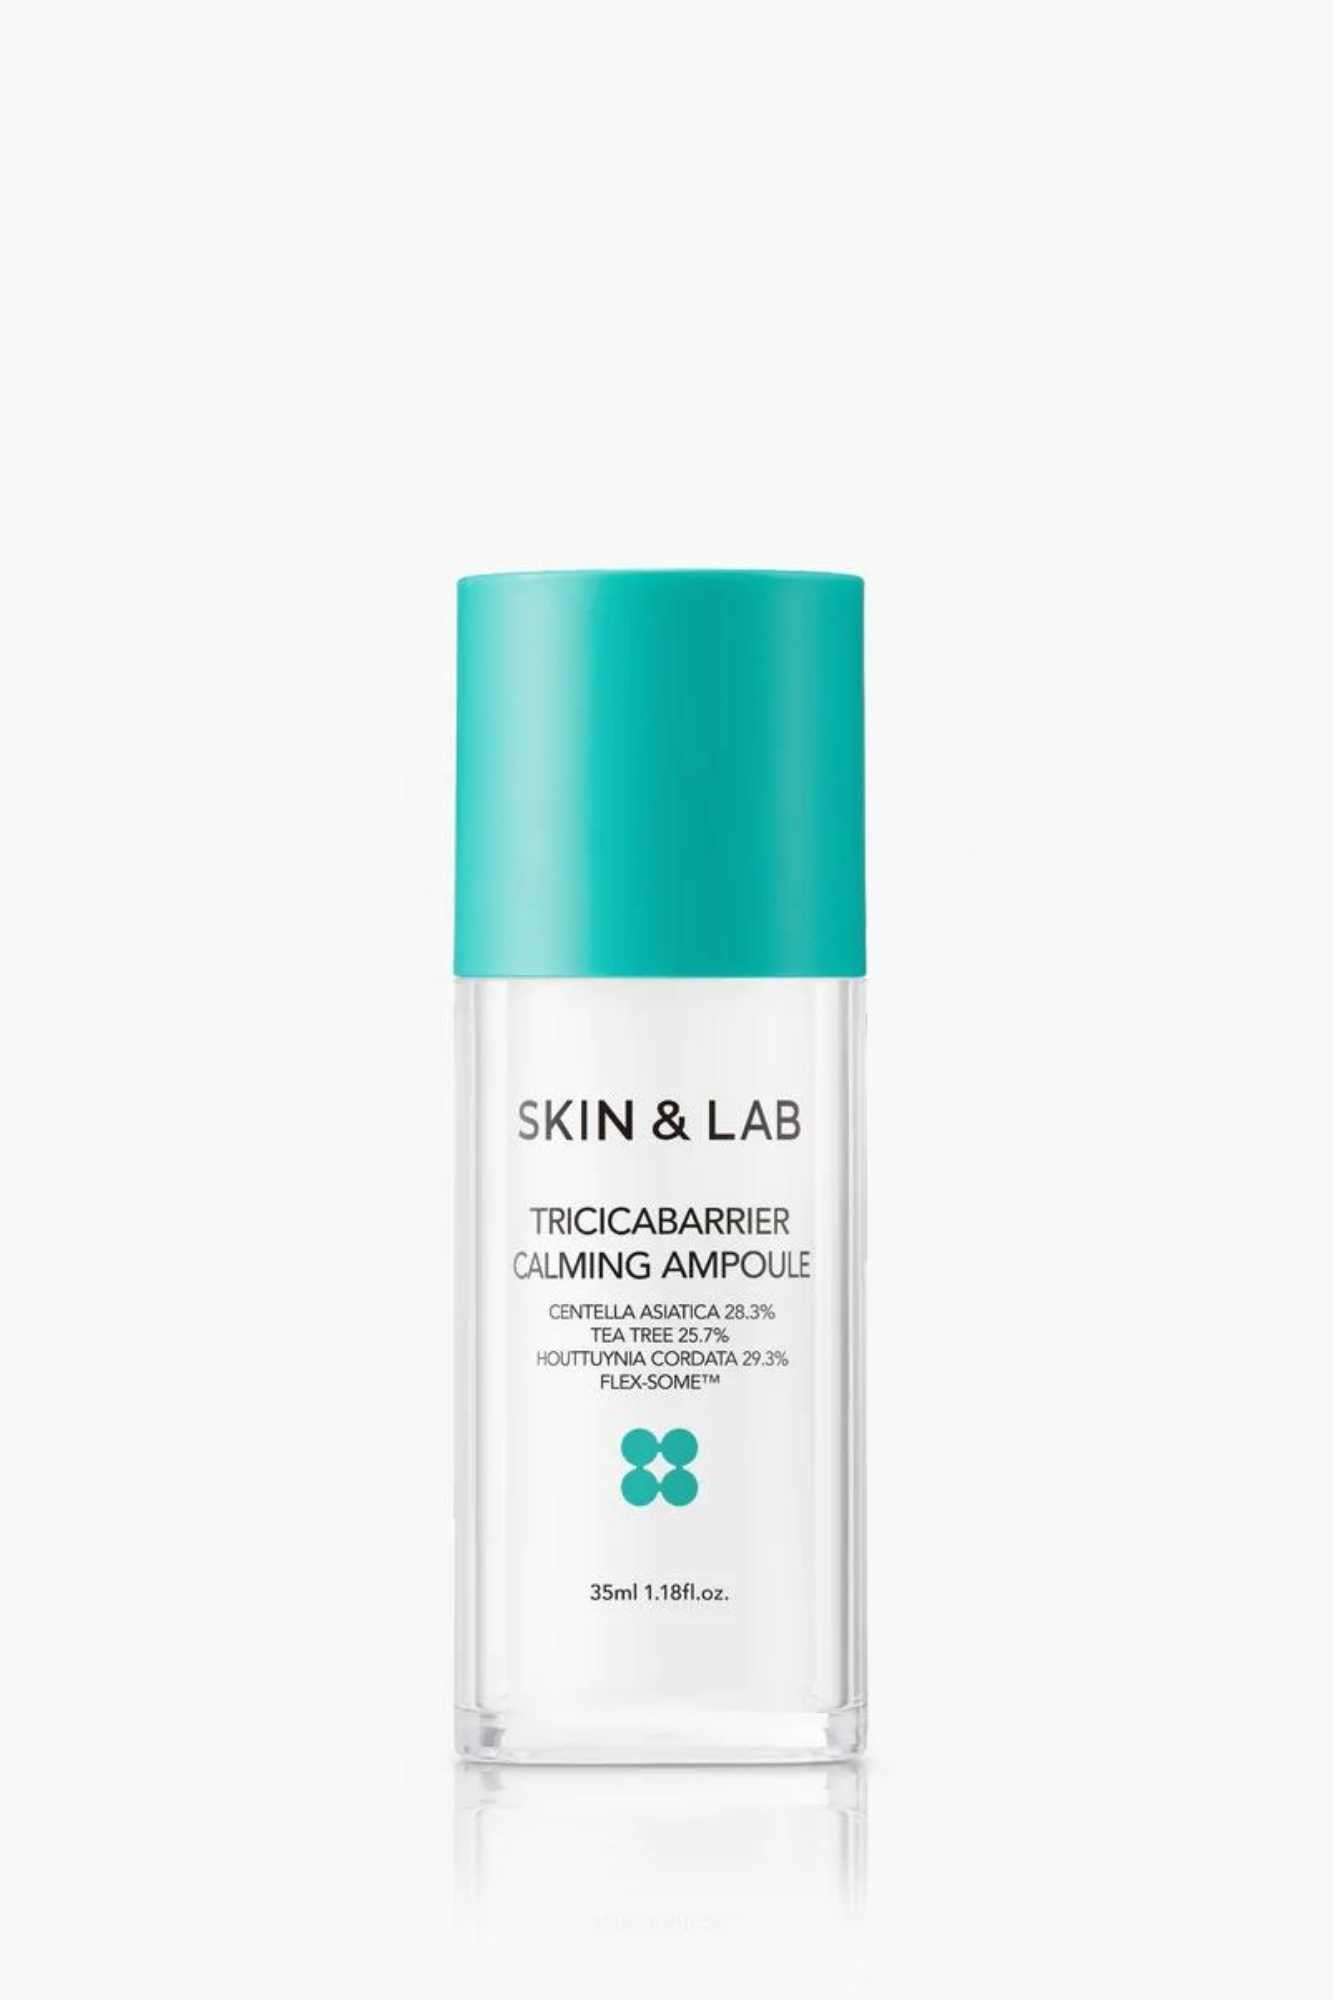 SKIN&LAB - Tricicabarrier Calming Ampoule - 35ml